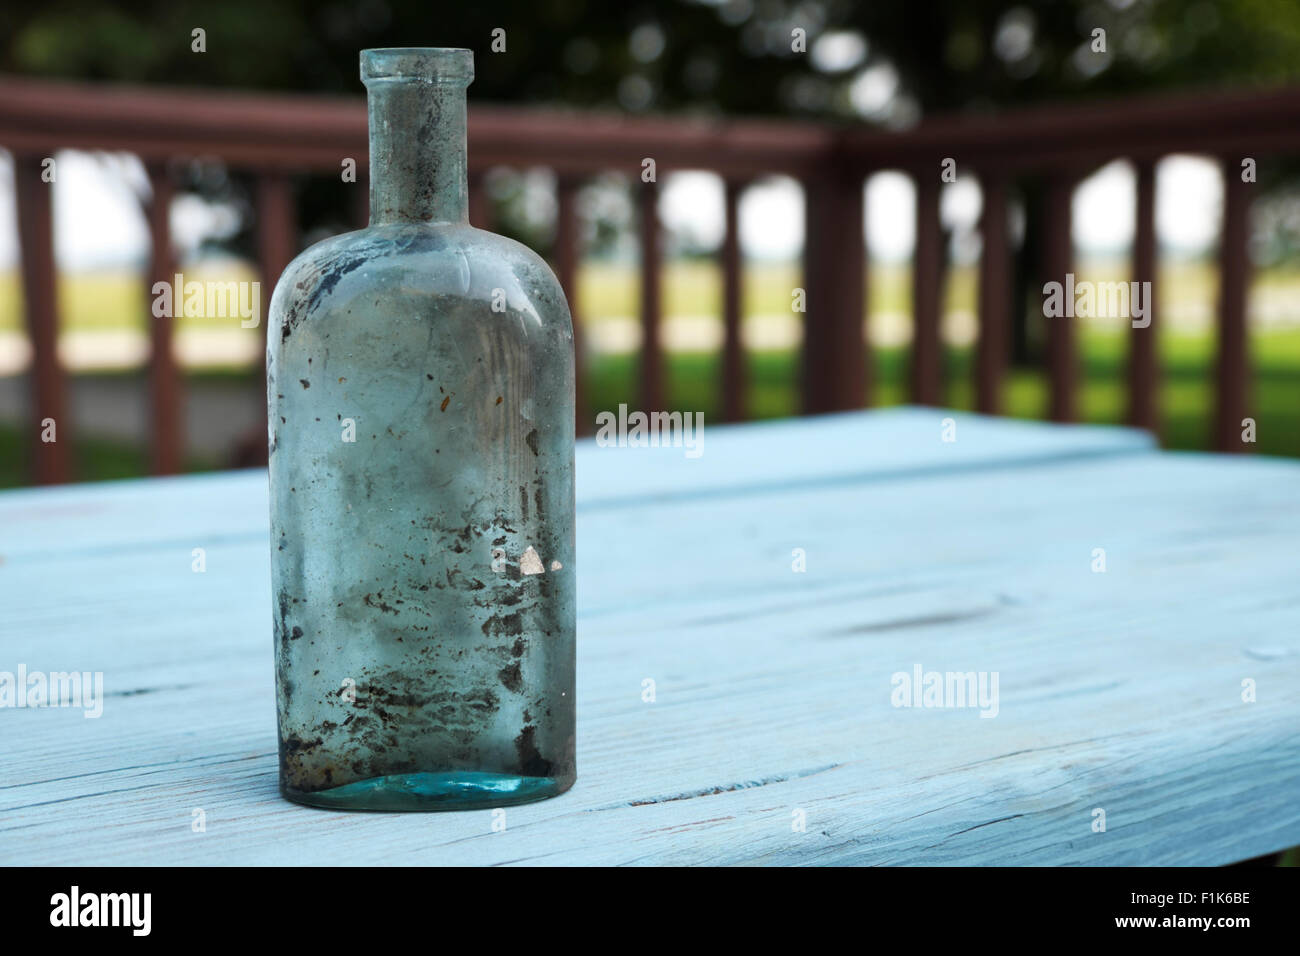 Antique, blown glass medicine bottle displayed on a painted blue, rustic picnic table. Stock Photo